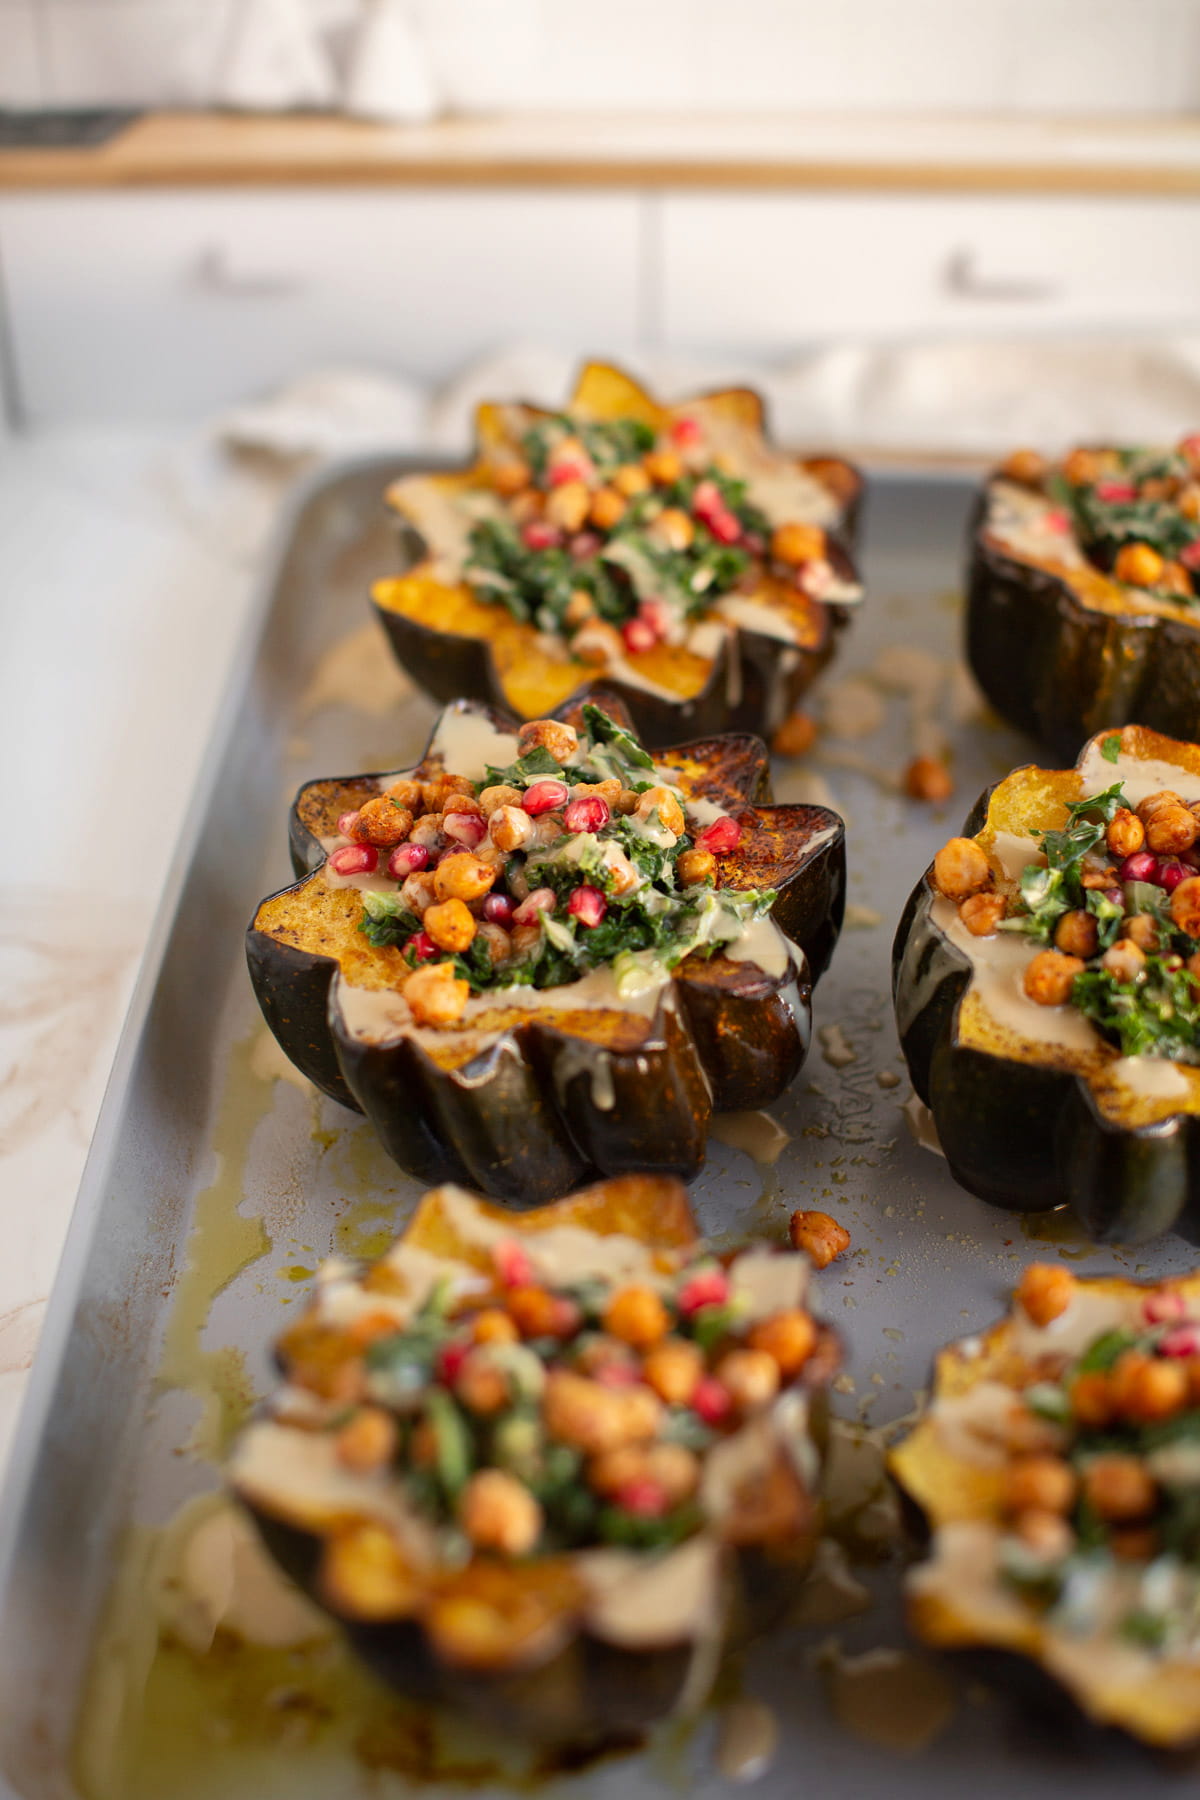 Vegetarian stuffed acorn squash with kale, pomegranate seeds, and chickpeas.